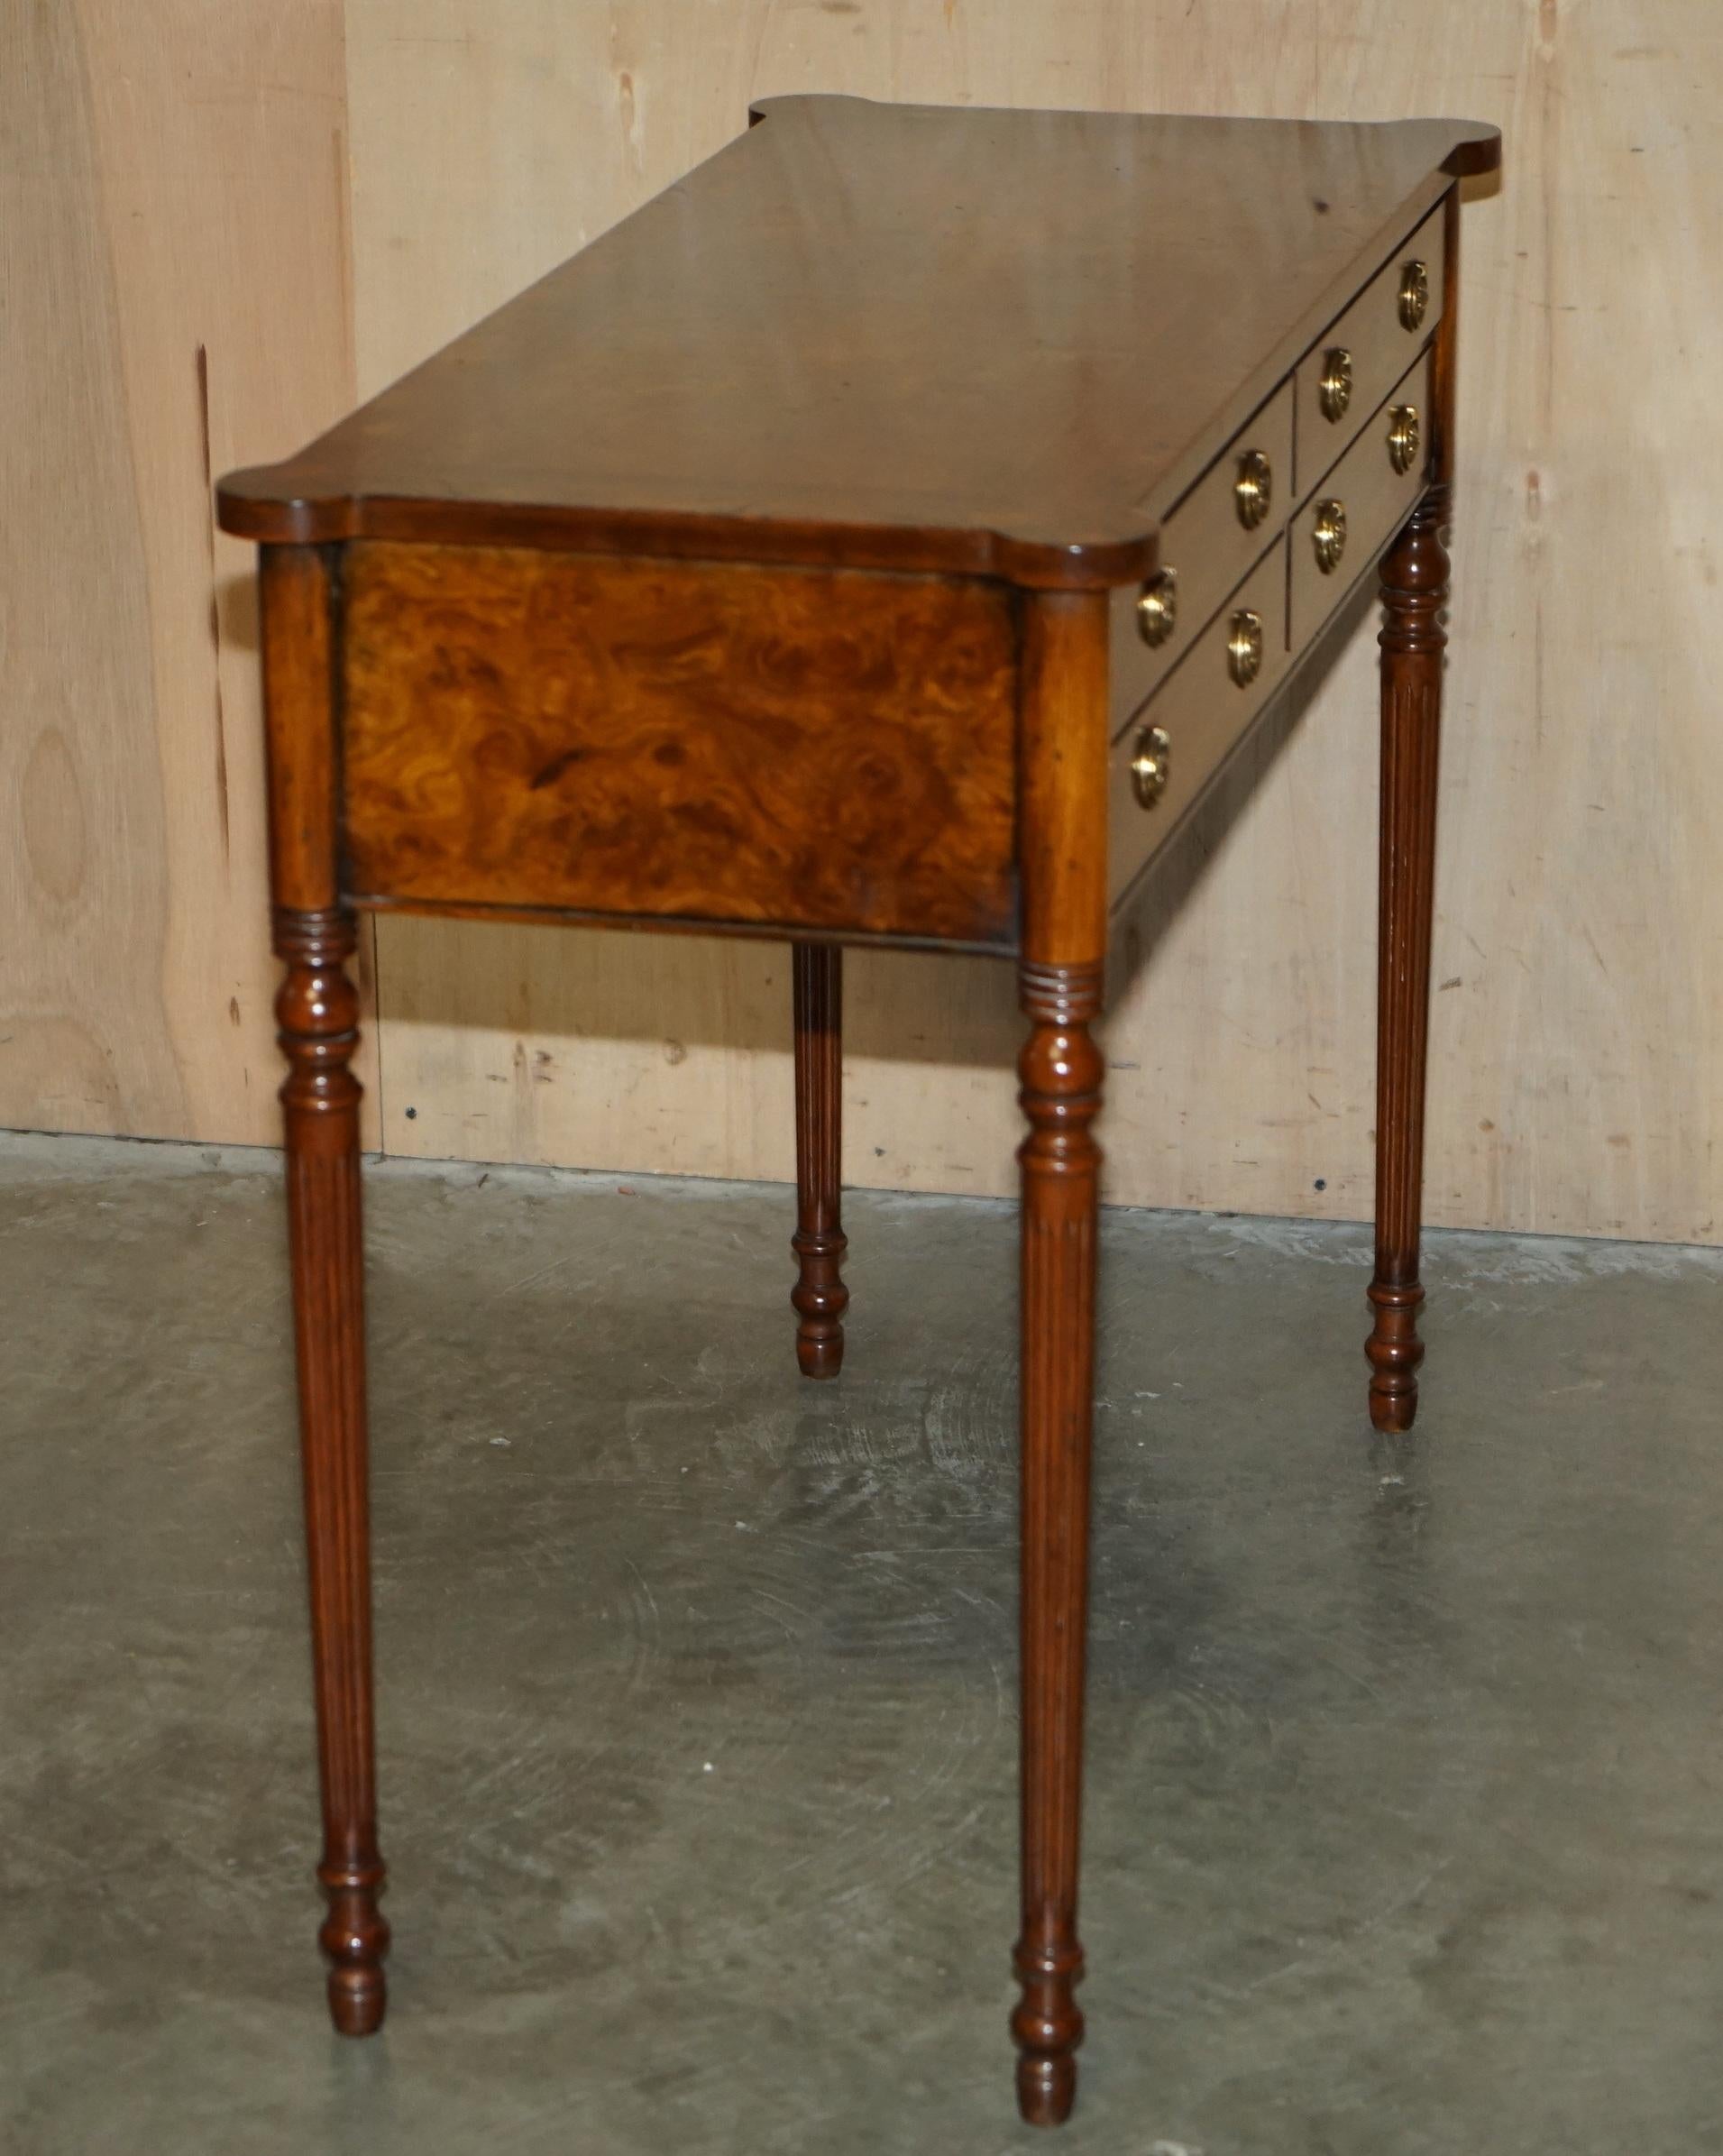 EXQUISITE CIRCA 1920 BURR ELM & SATiNWOOD FRENCH POLISHED RESTORED CONSOLE TABLE For Sale 6